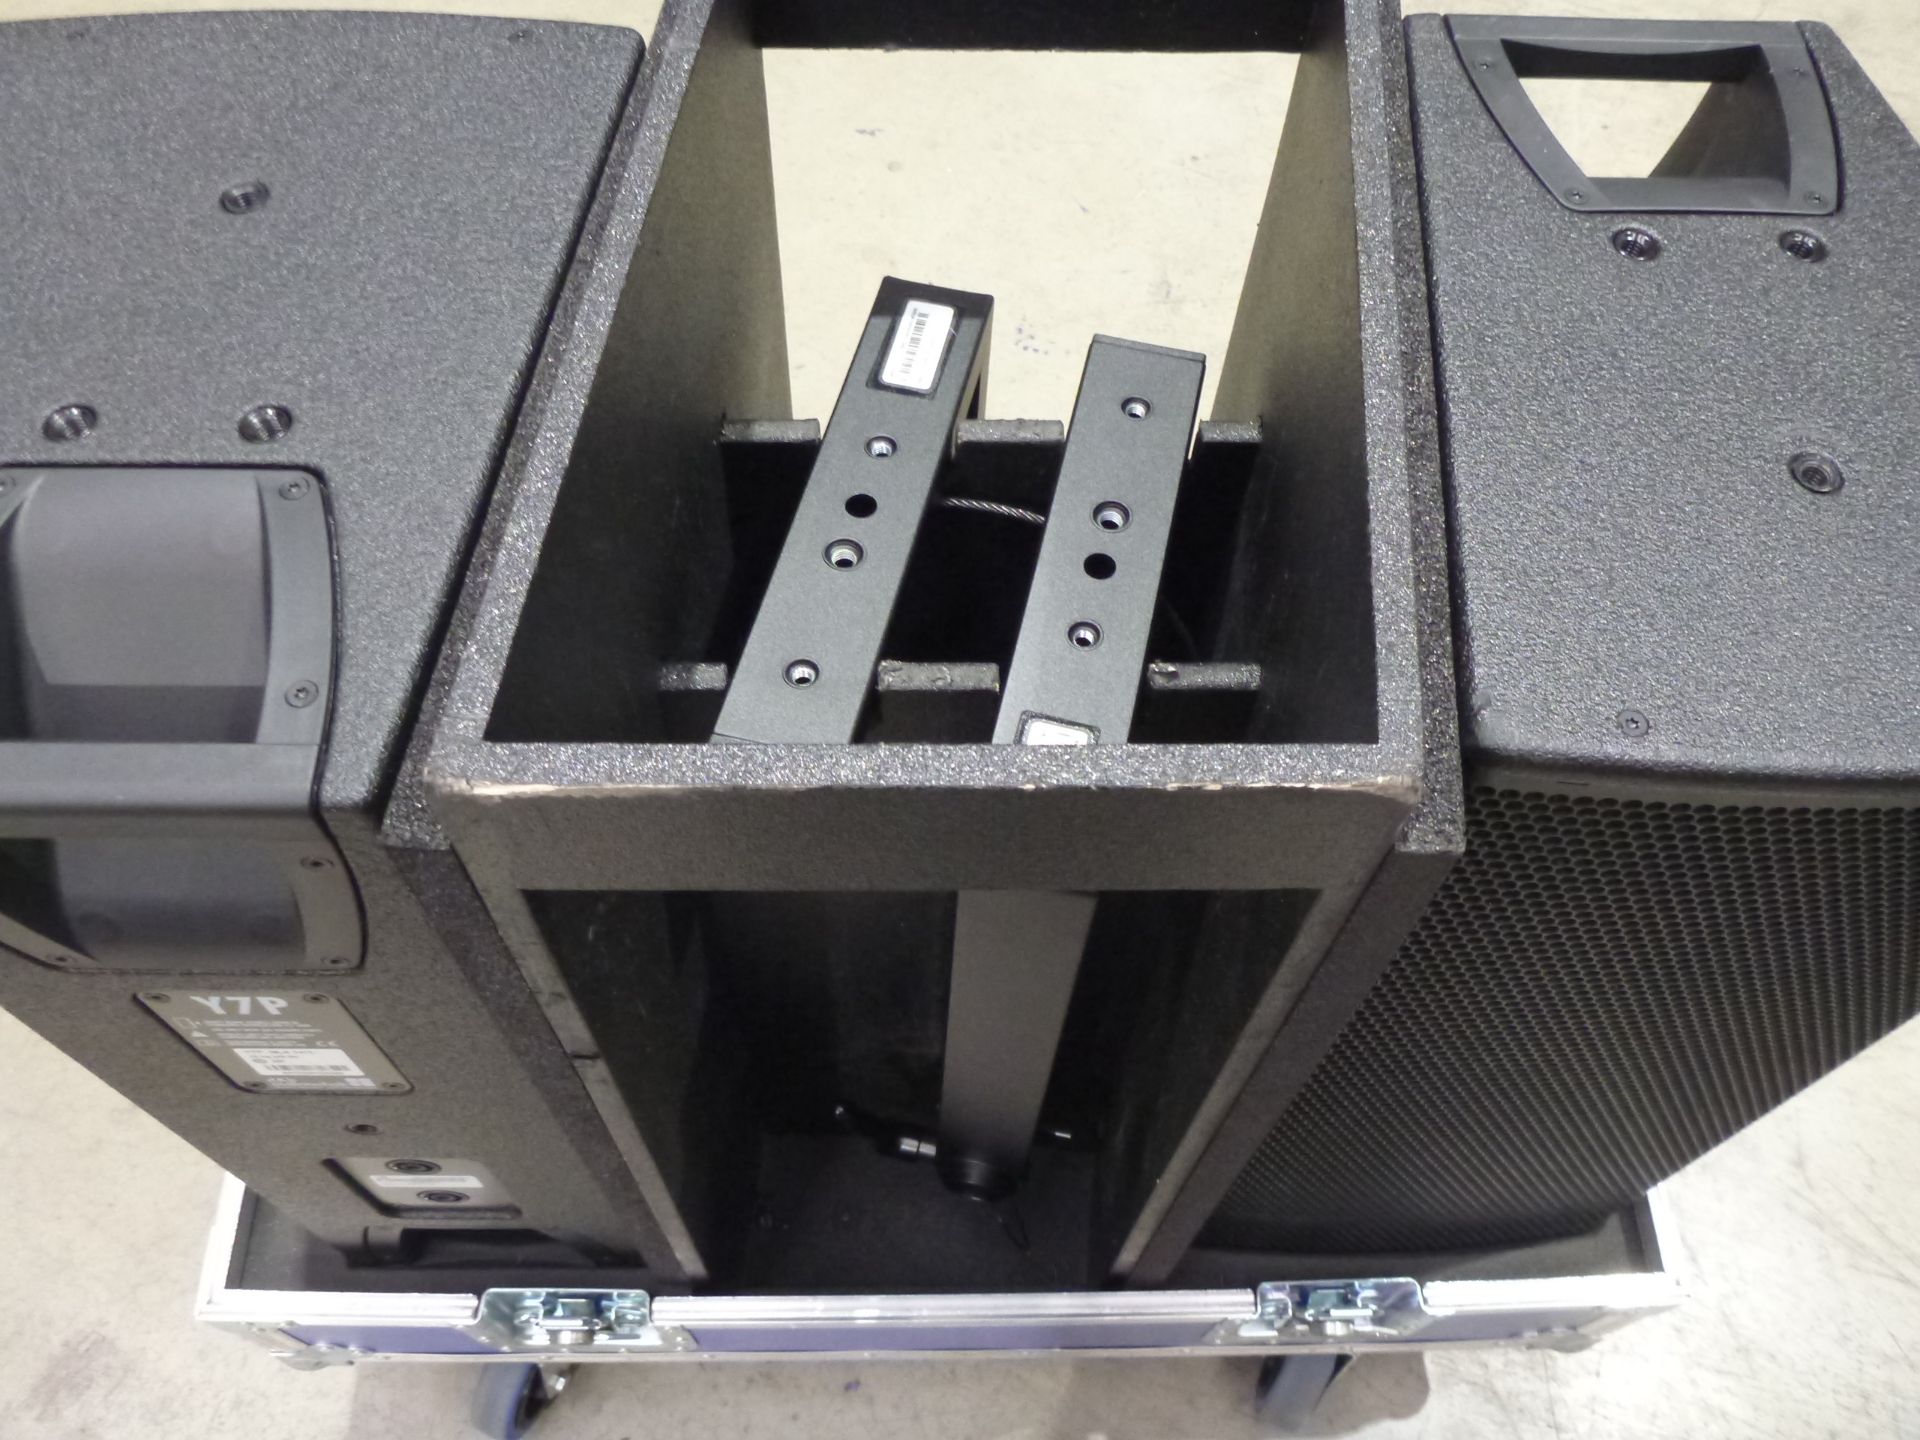 D & B Audiotecknik Y7P Loudspeakers (Pair) In flight case with flying frame, top hat and safety - Image 6 of 7